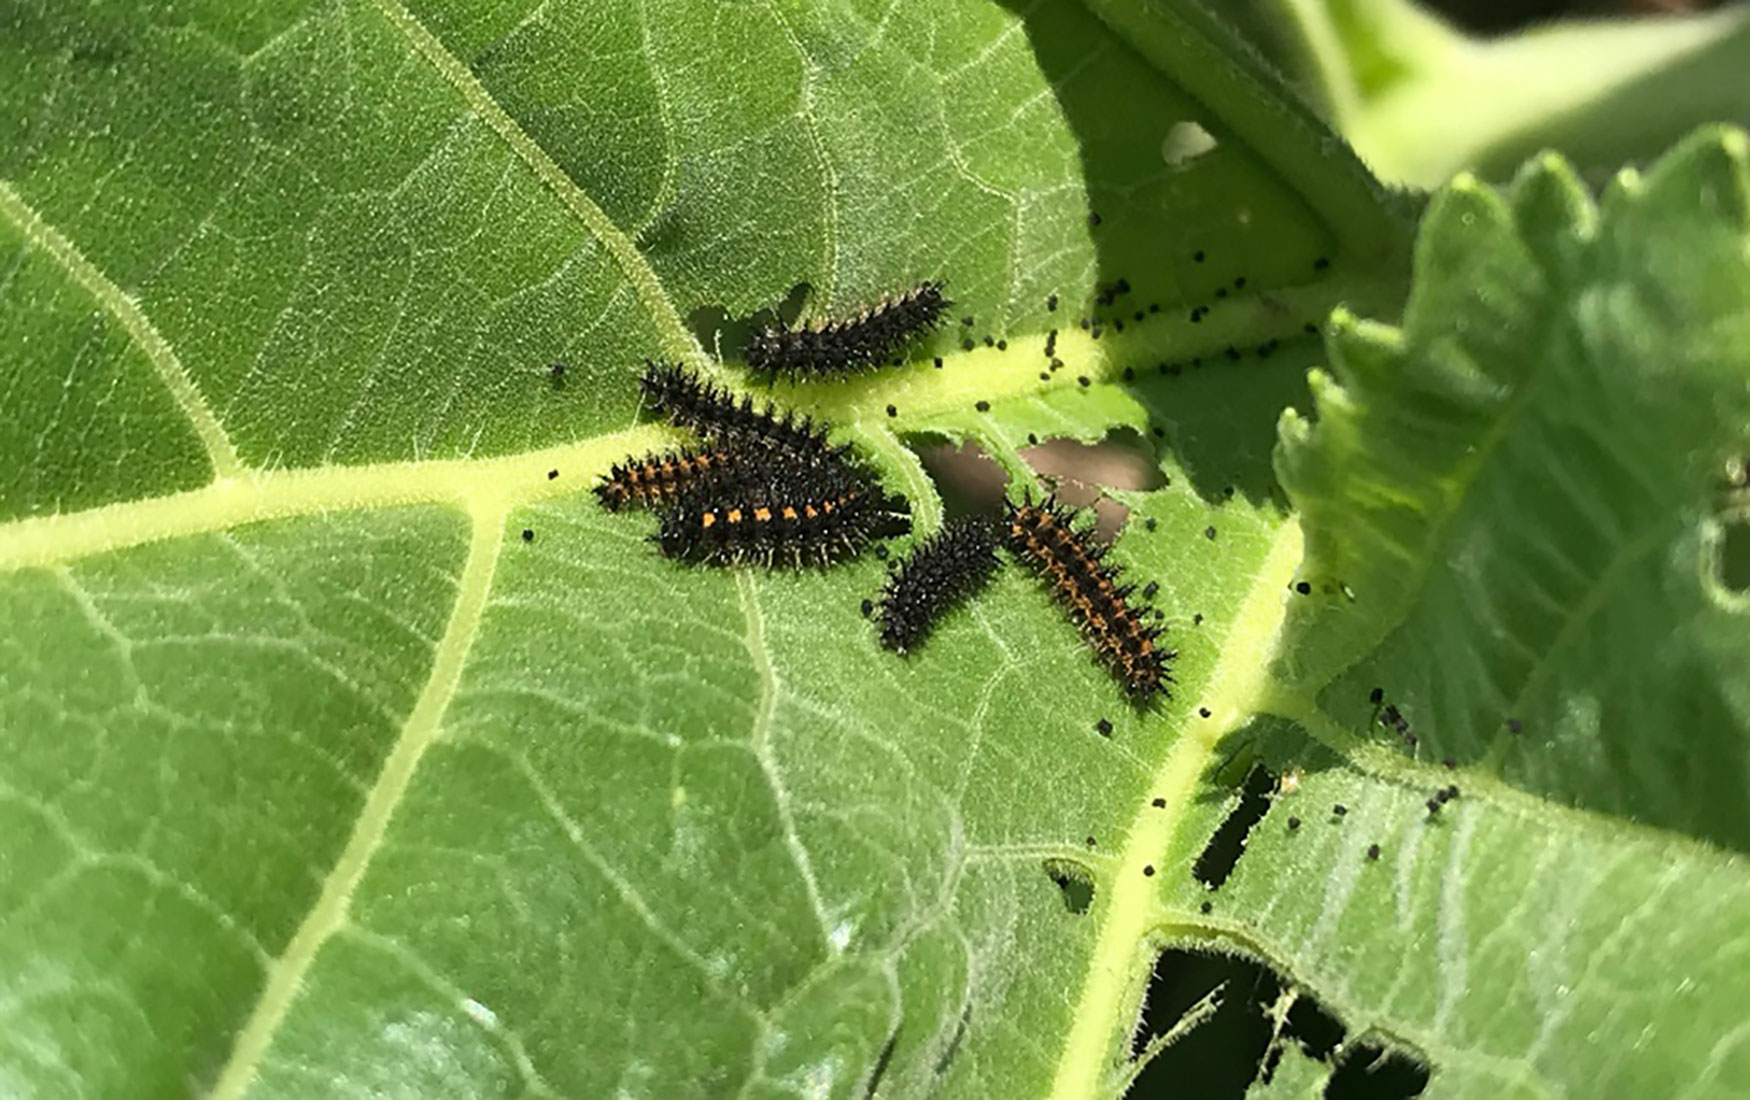 Close-up of several black caterpillars feeding on a green sunflower leaf.